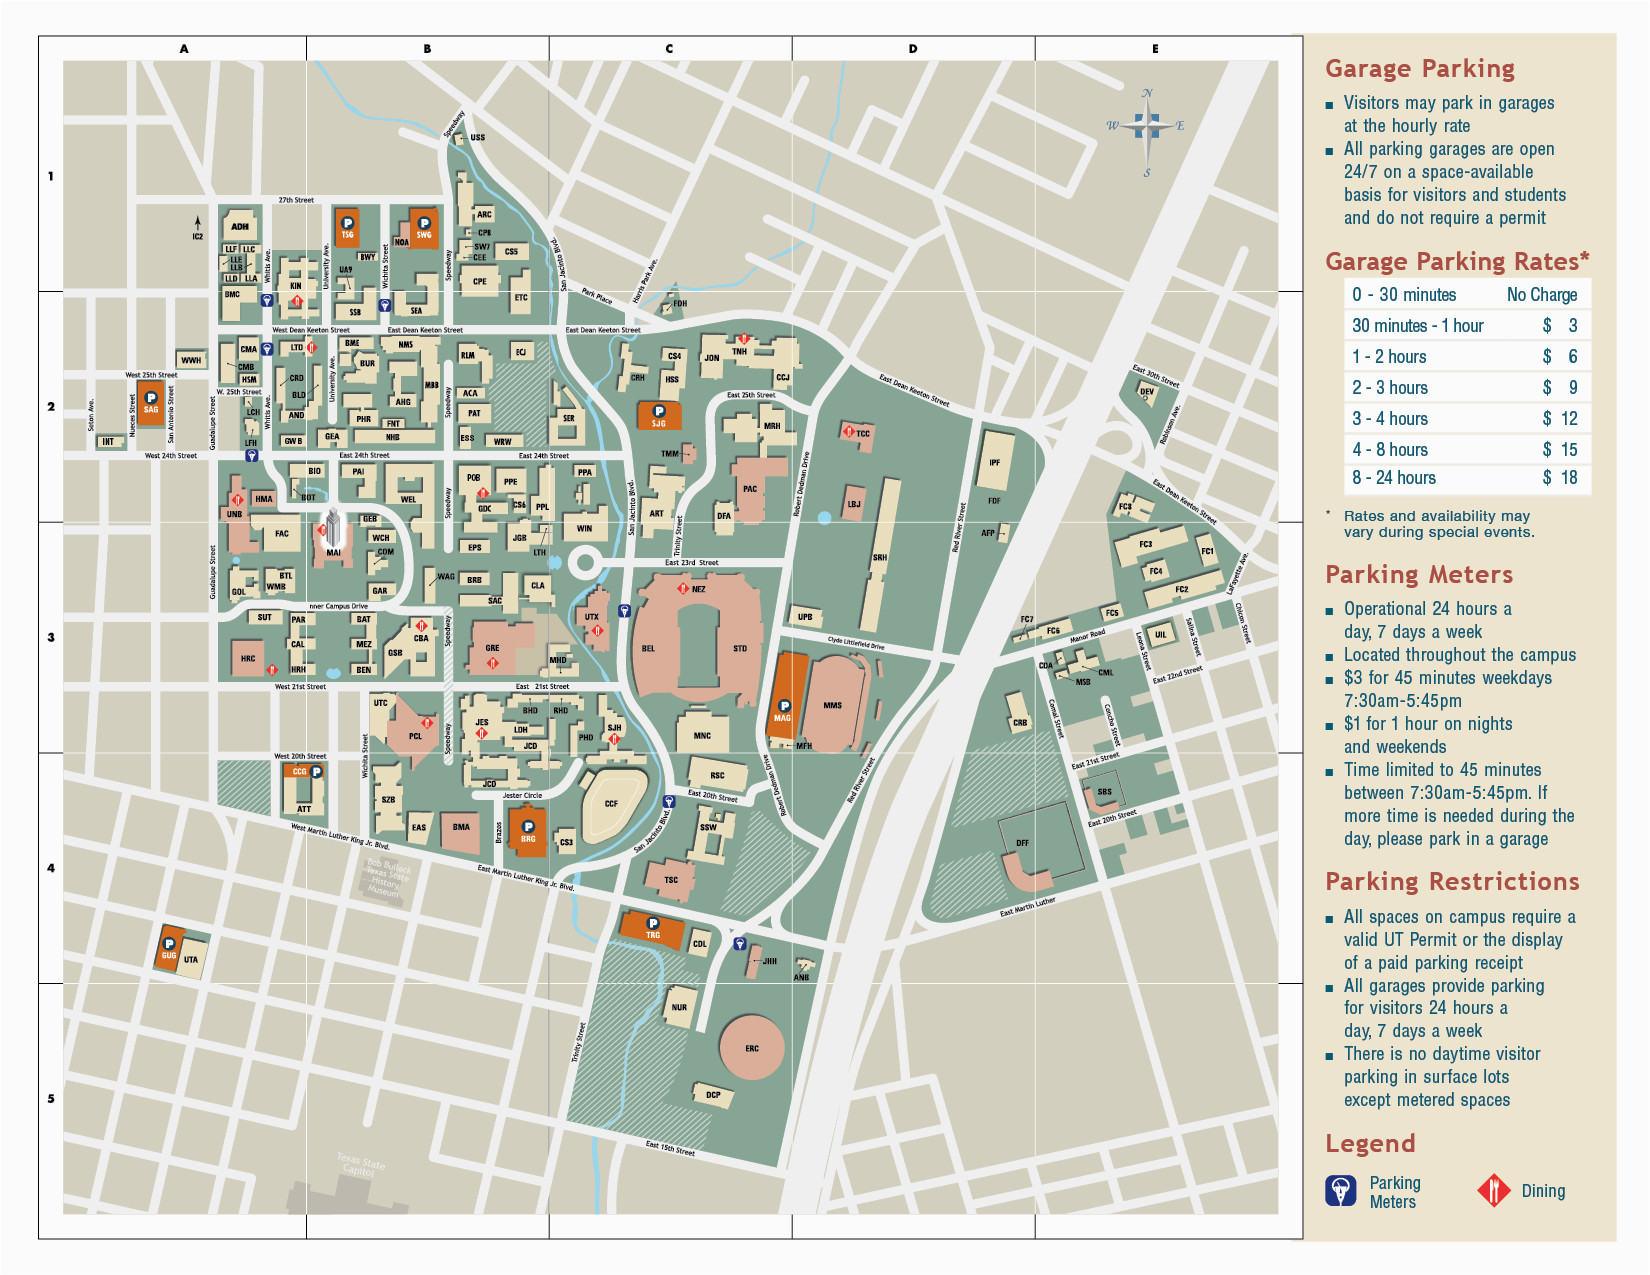 Universities In Texas Map University Of Texas at Austin Campus Map Business Ideas 2013